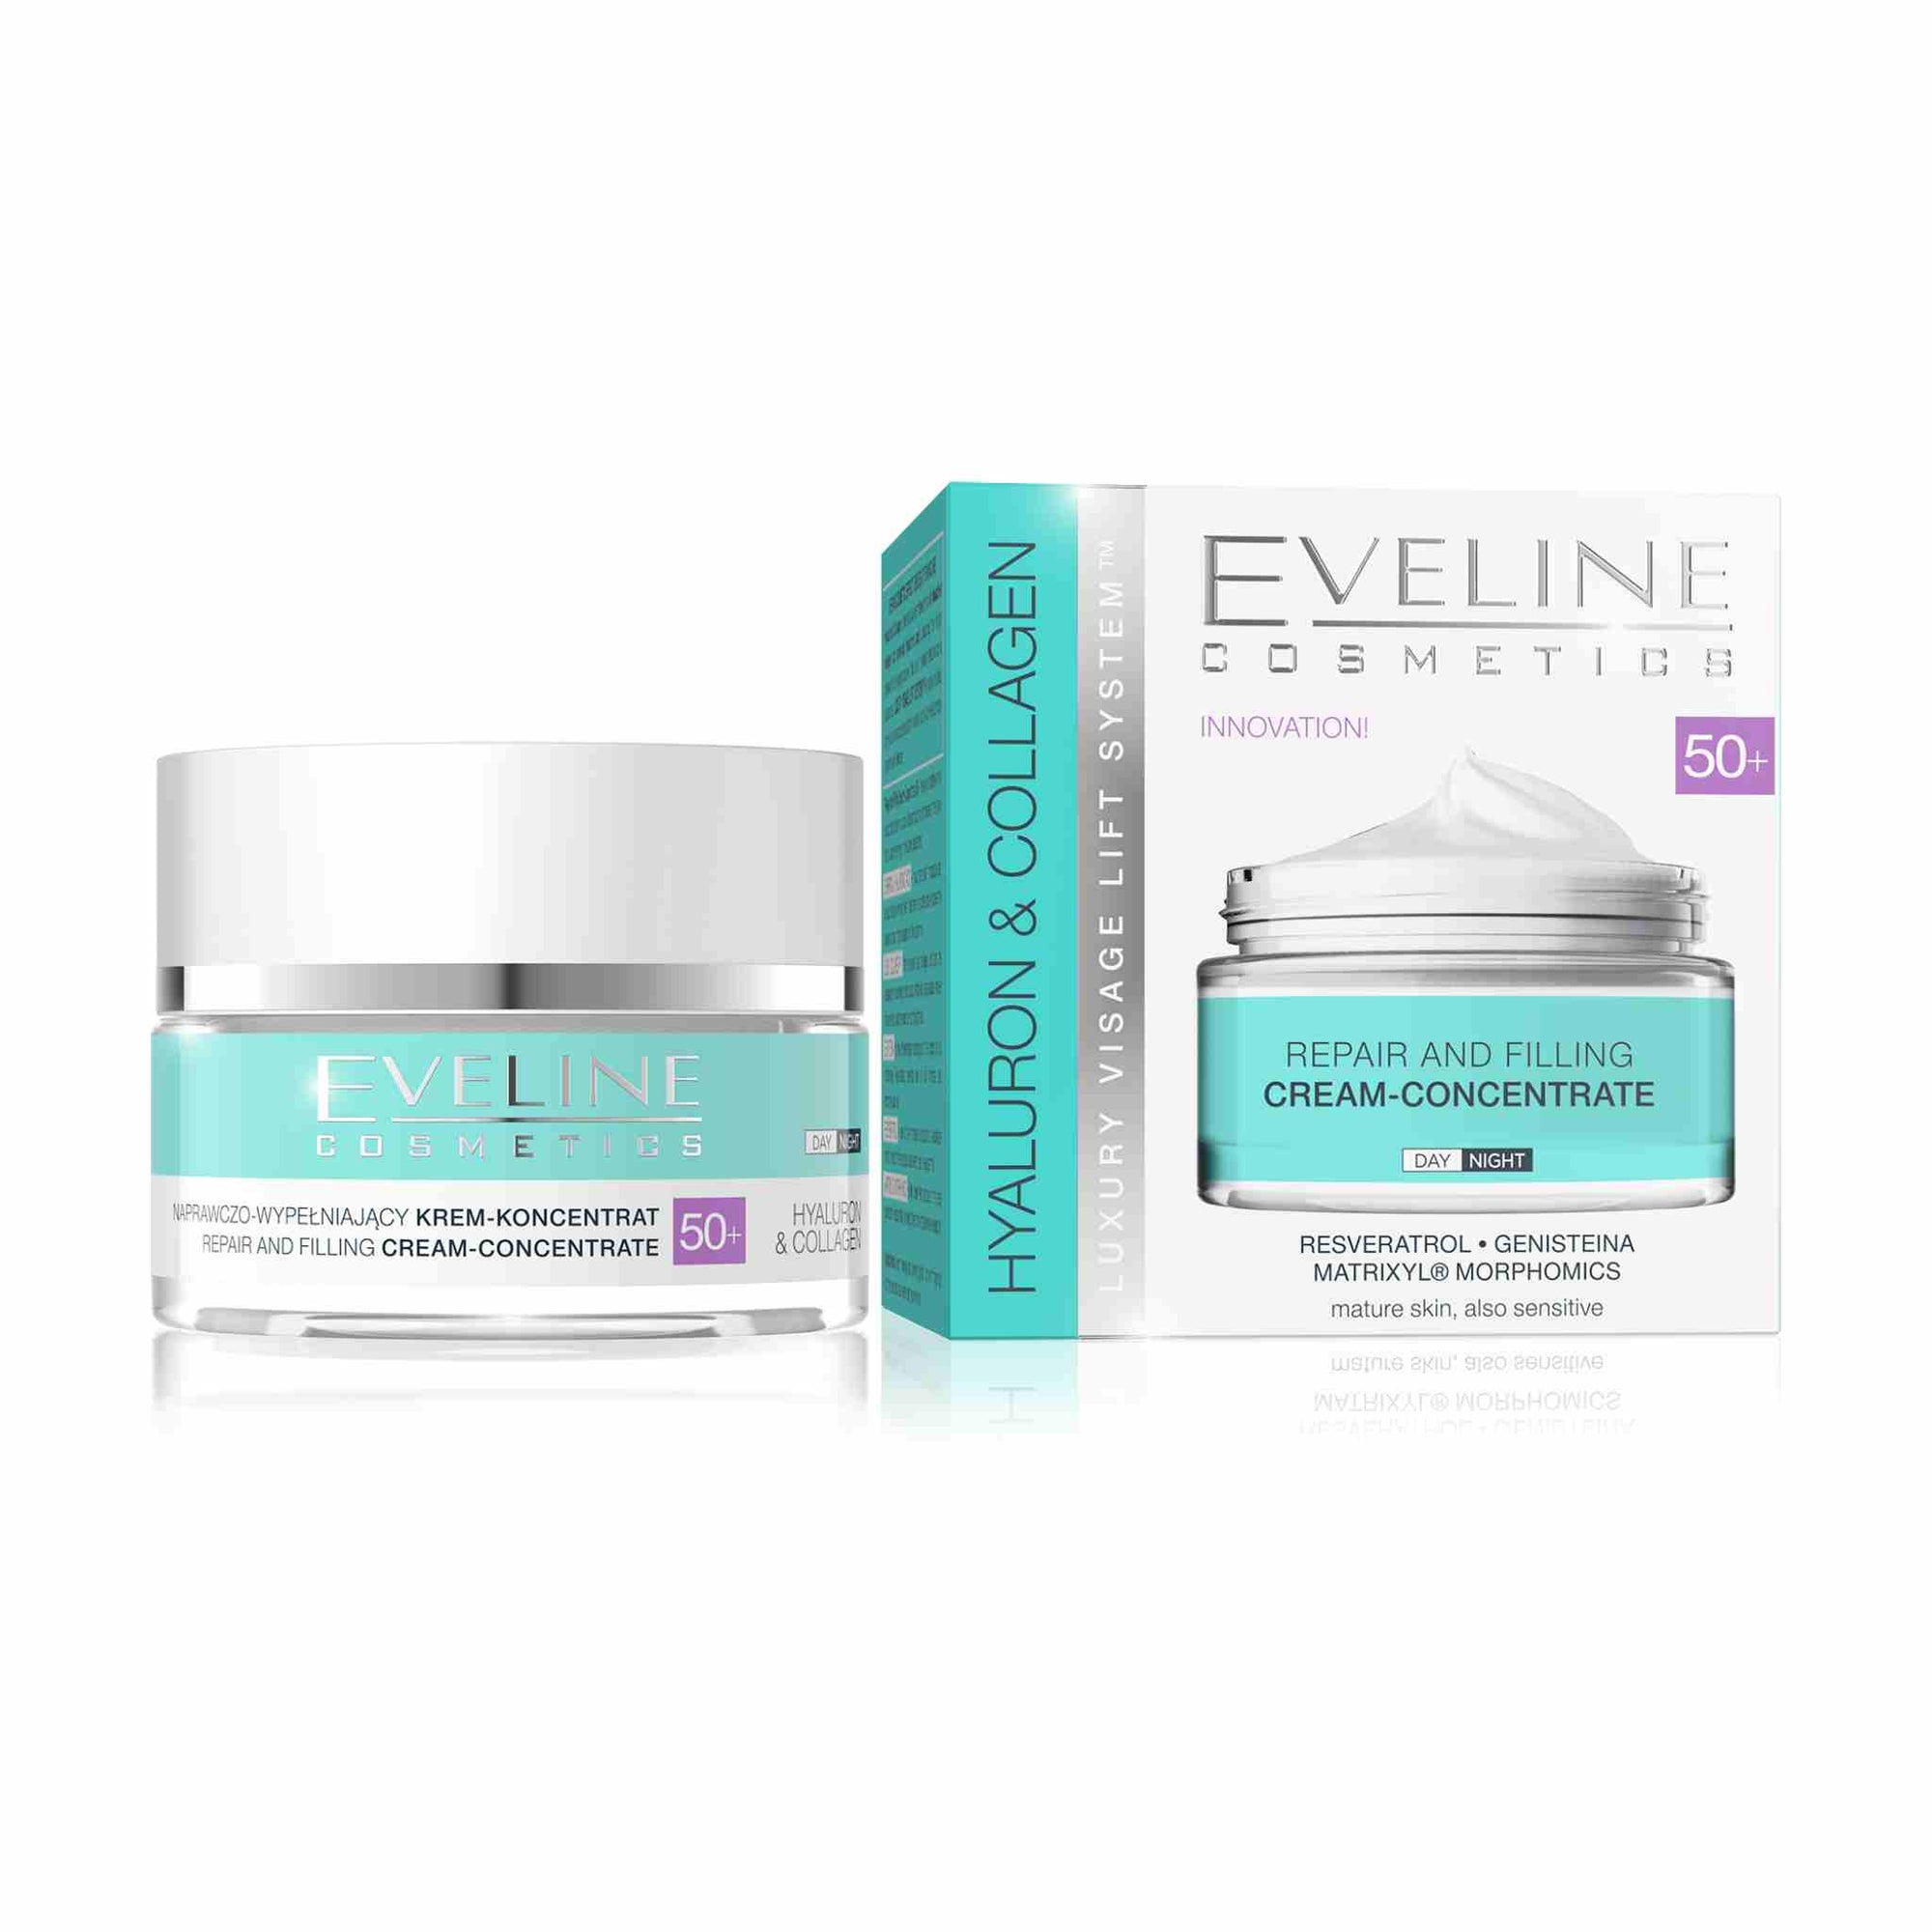 Hyaluron and Collagen Repairing and Filling Day and Night Cream With Luxury Visage Lift System 50+